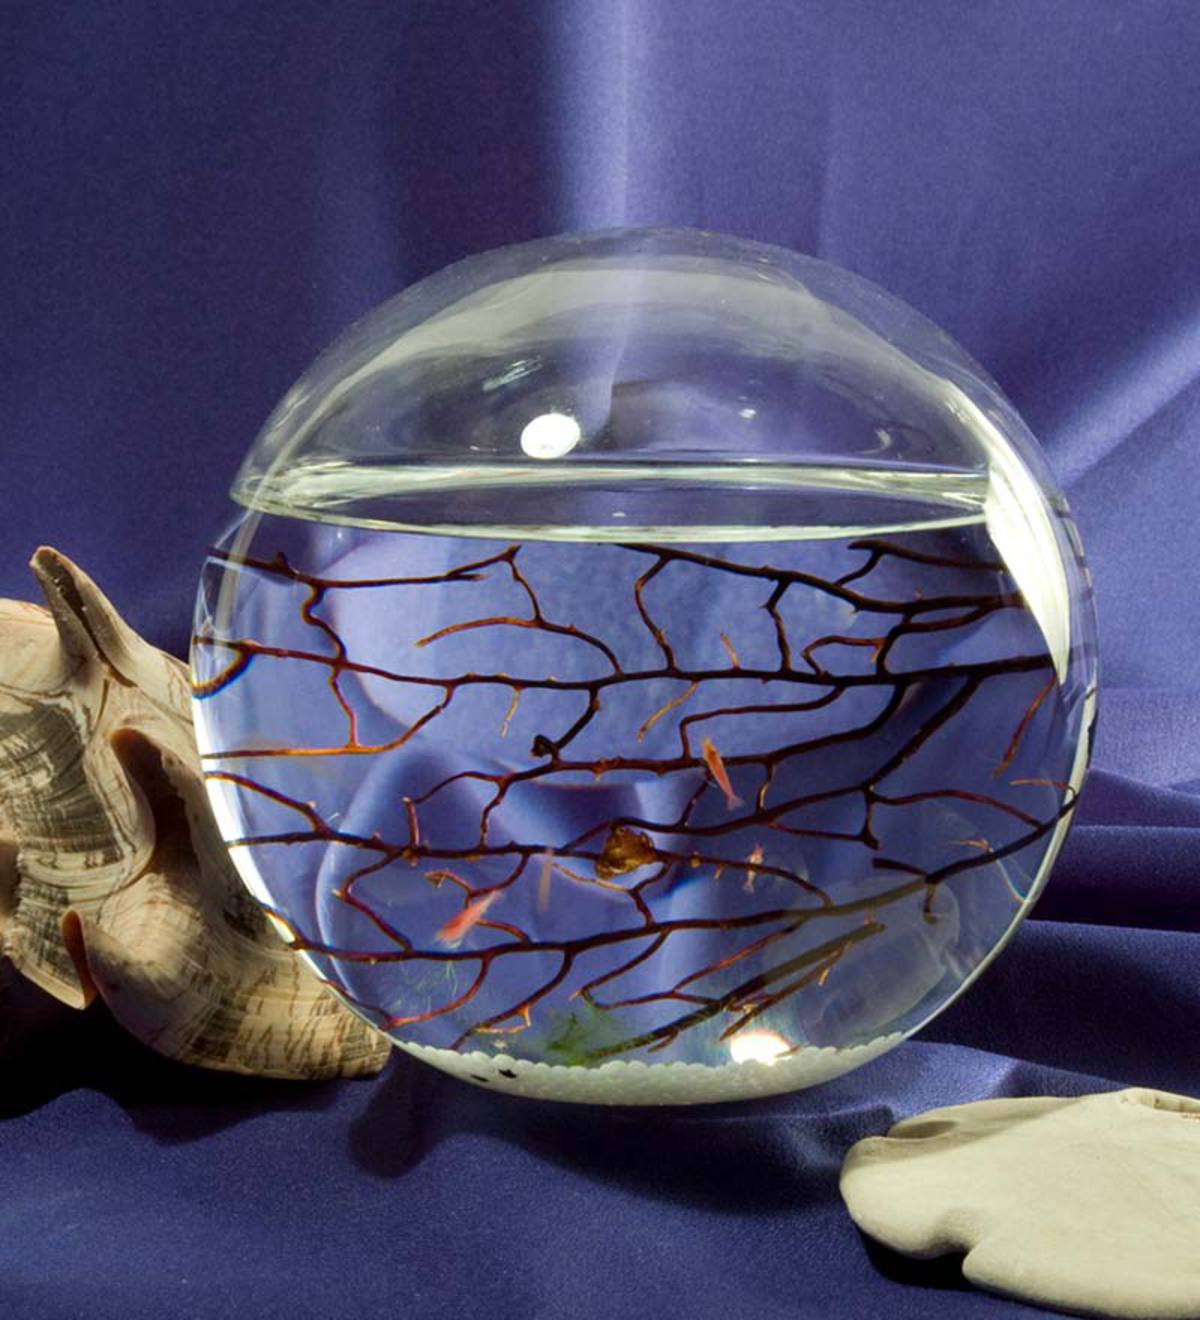 EcoSphere Large Sphere, The World's First Totally Enclosed Ecosystem